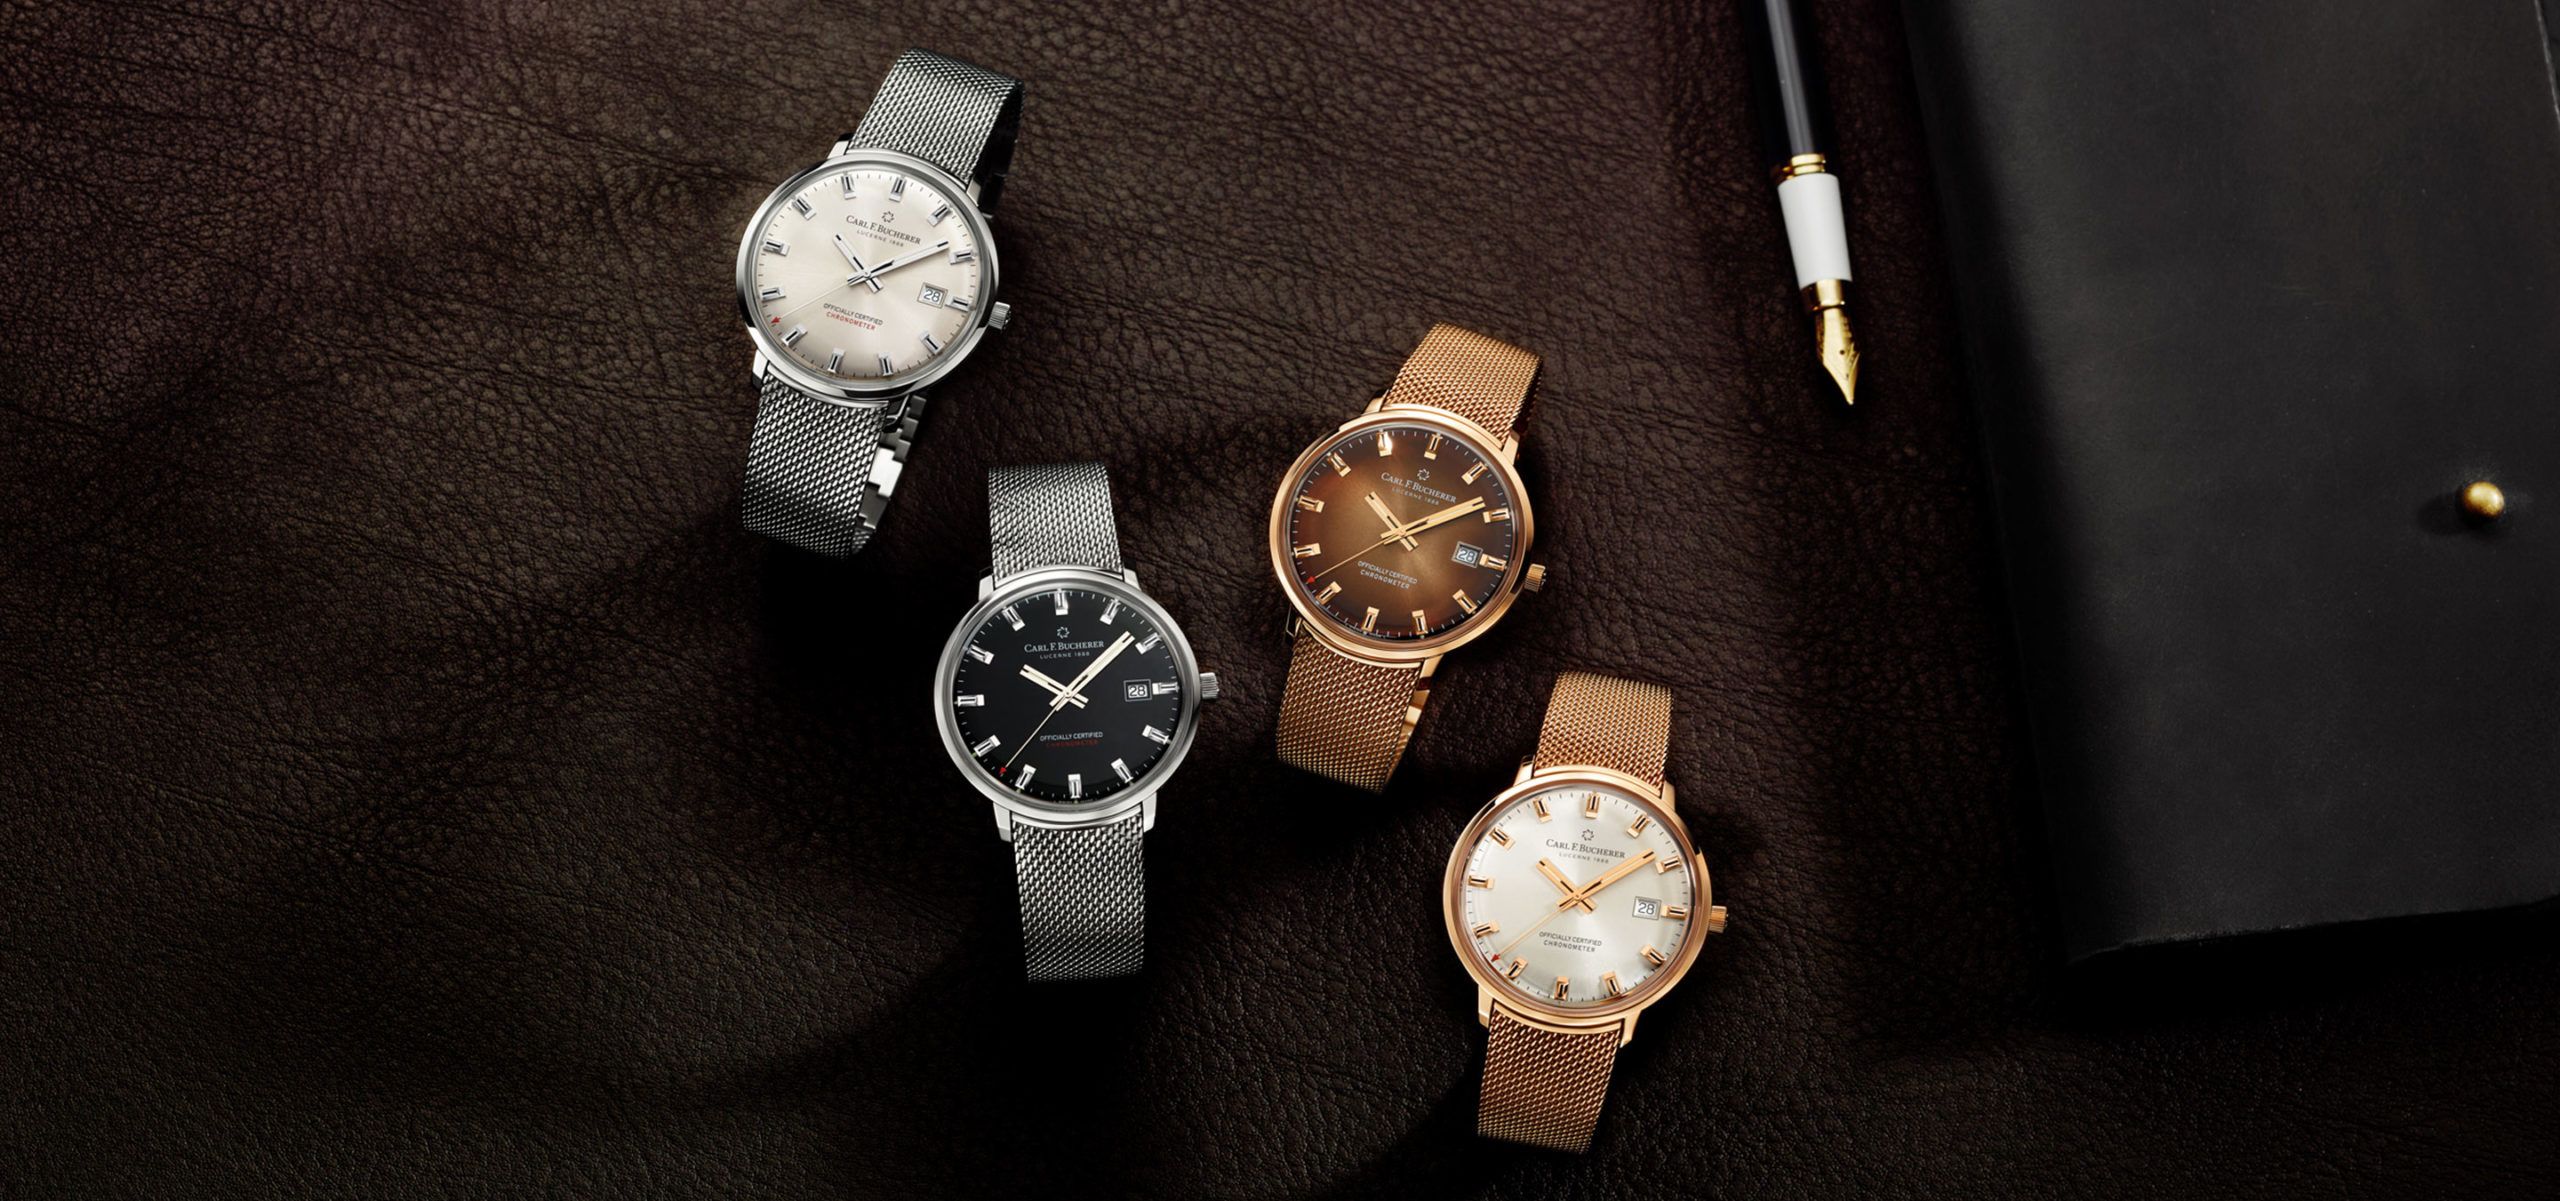 Simply Stunning: Introducing The Heritage Chronometer Celebration timepieces By Carl F. Bucherer